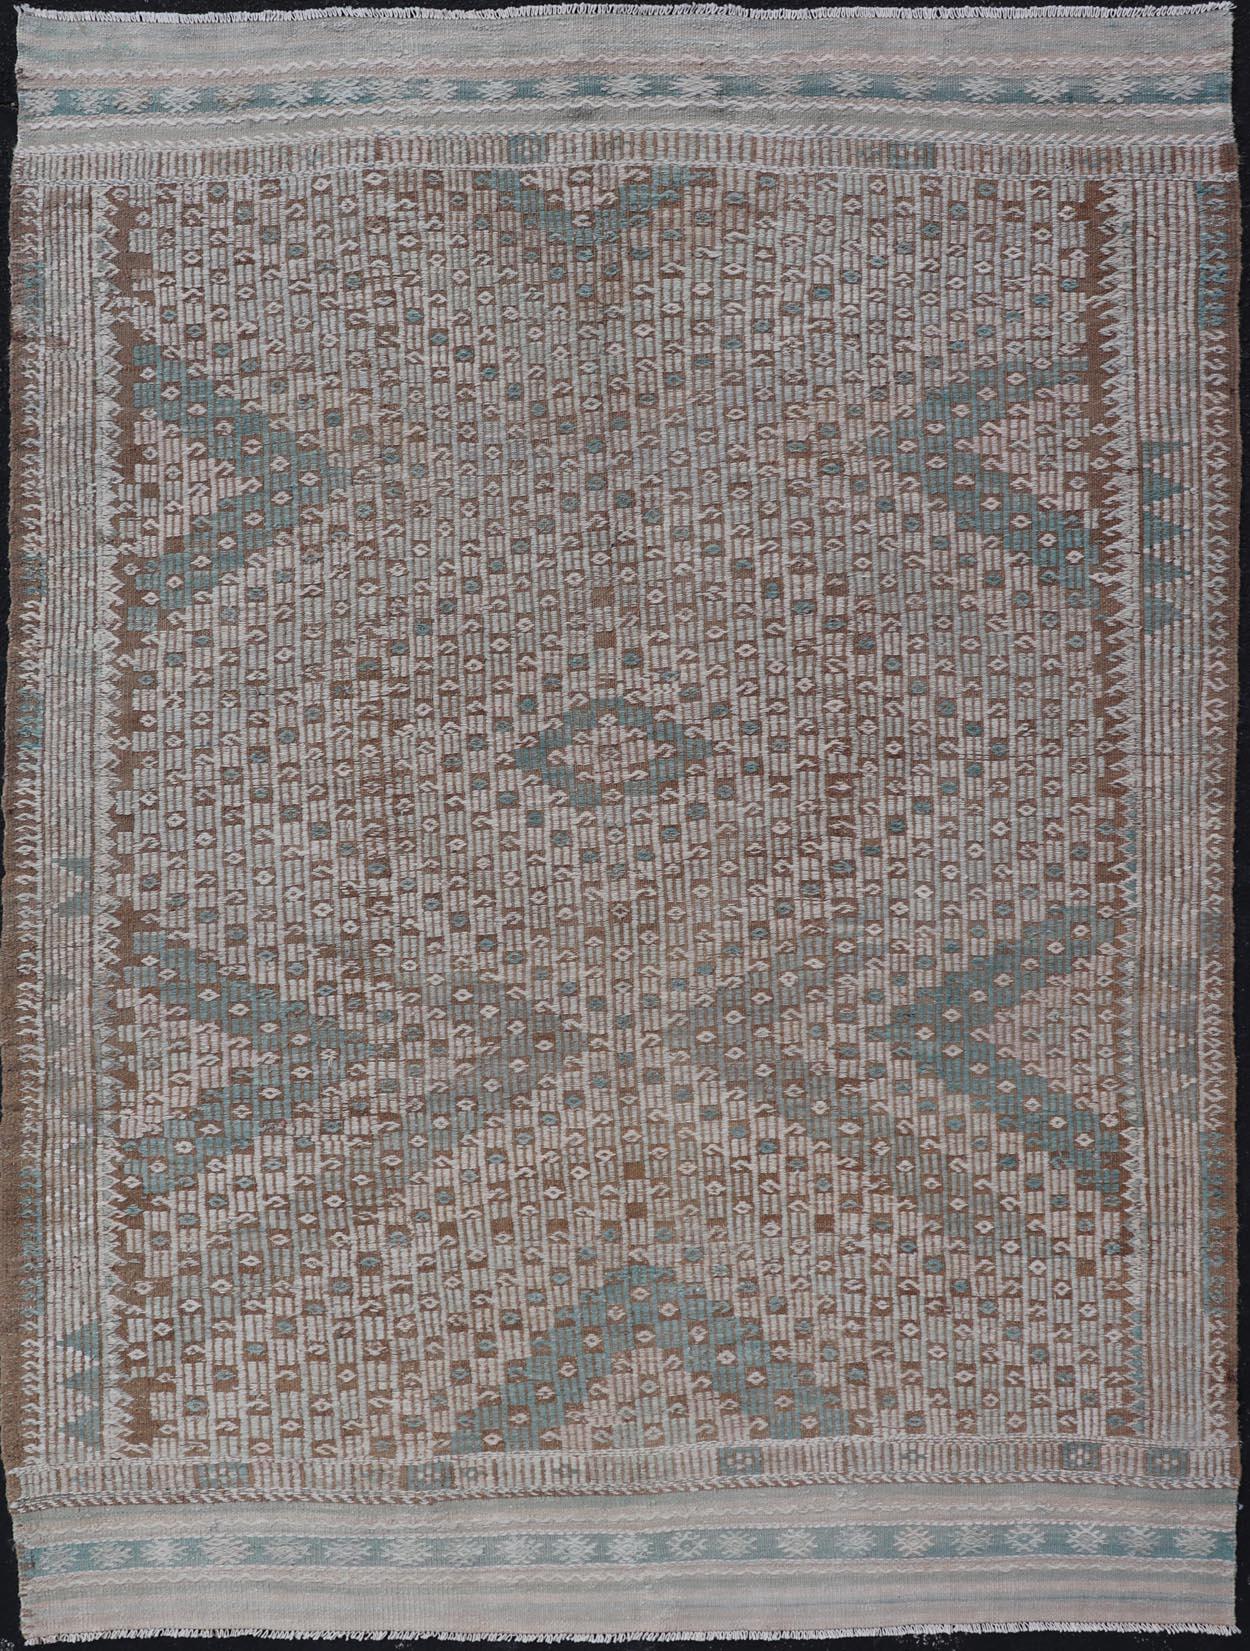 Vintage Turkish Embroidered Flat-Weave Rug with Geometric Design